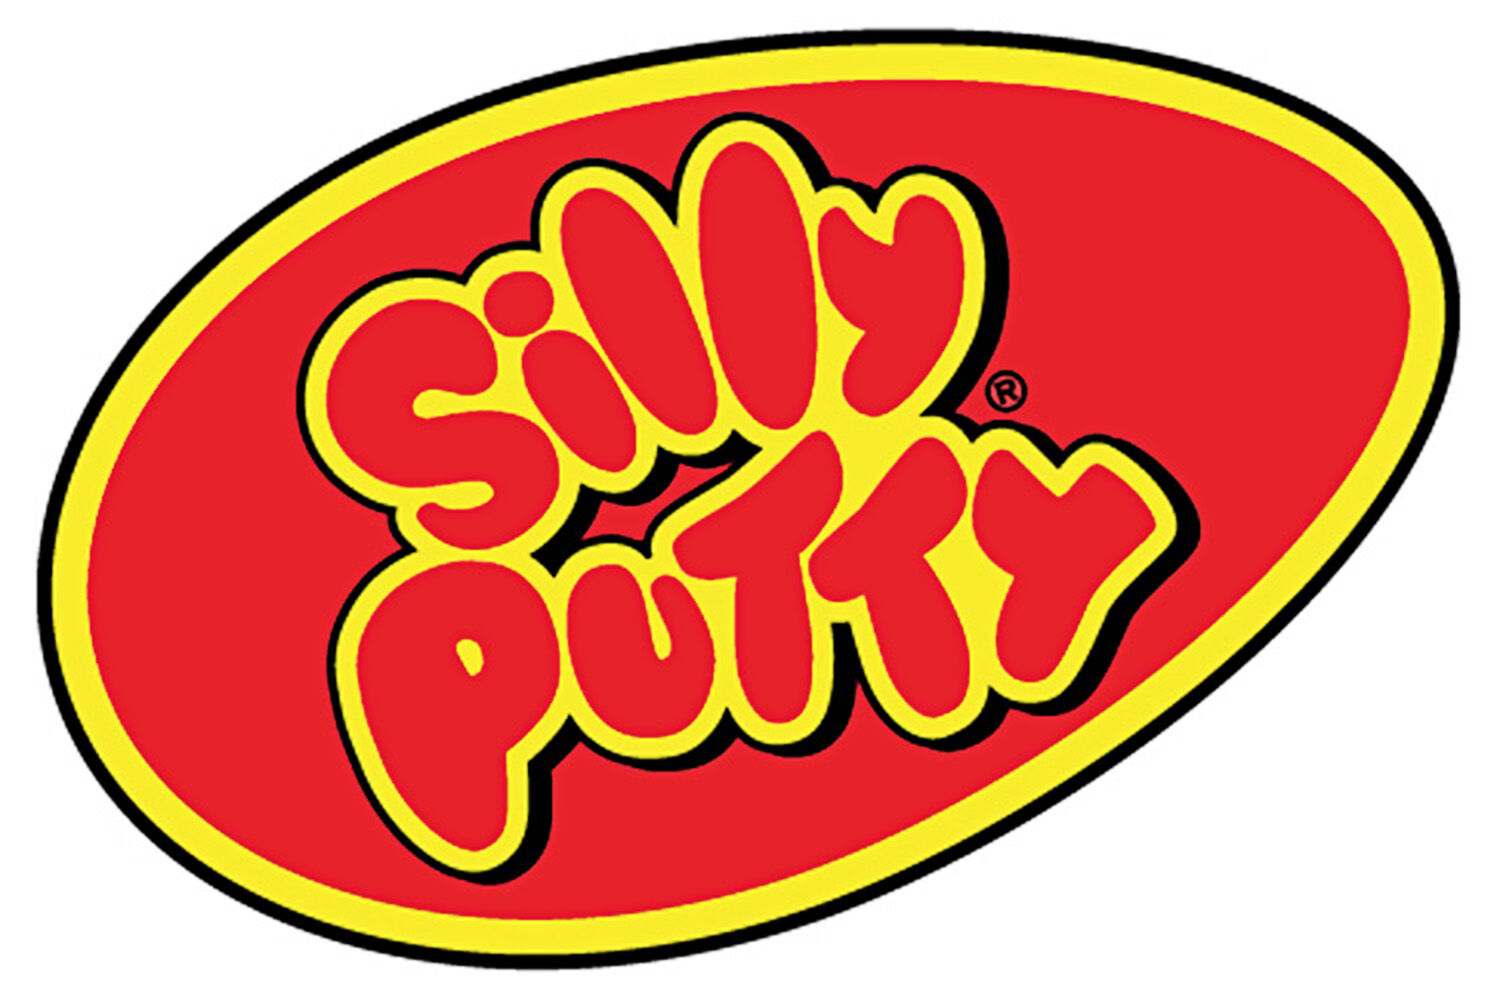 50 pounds of silly putty